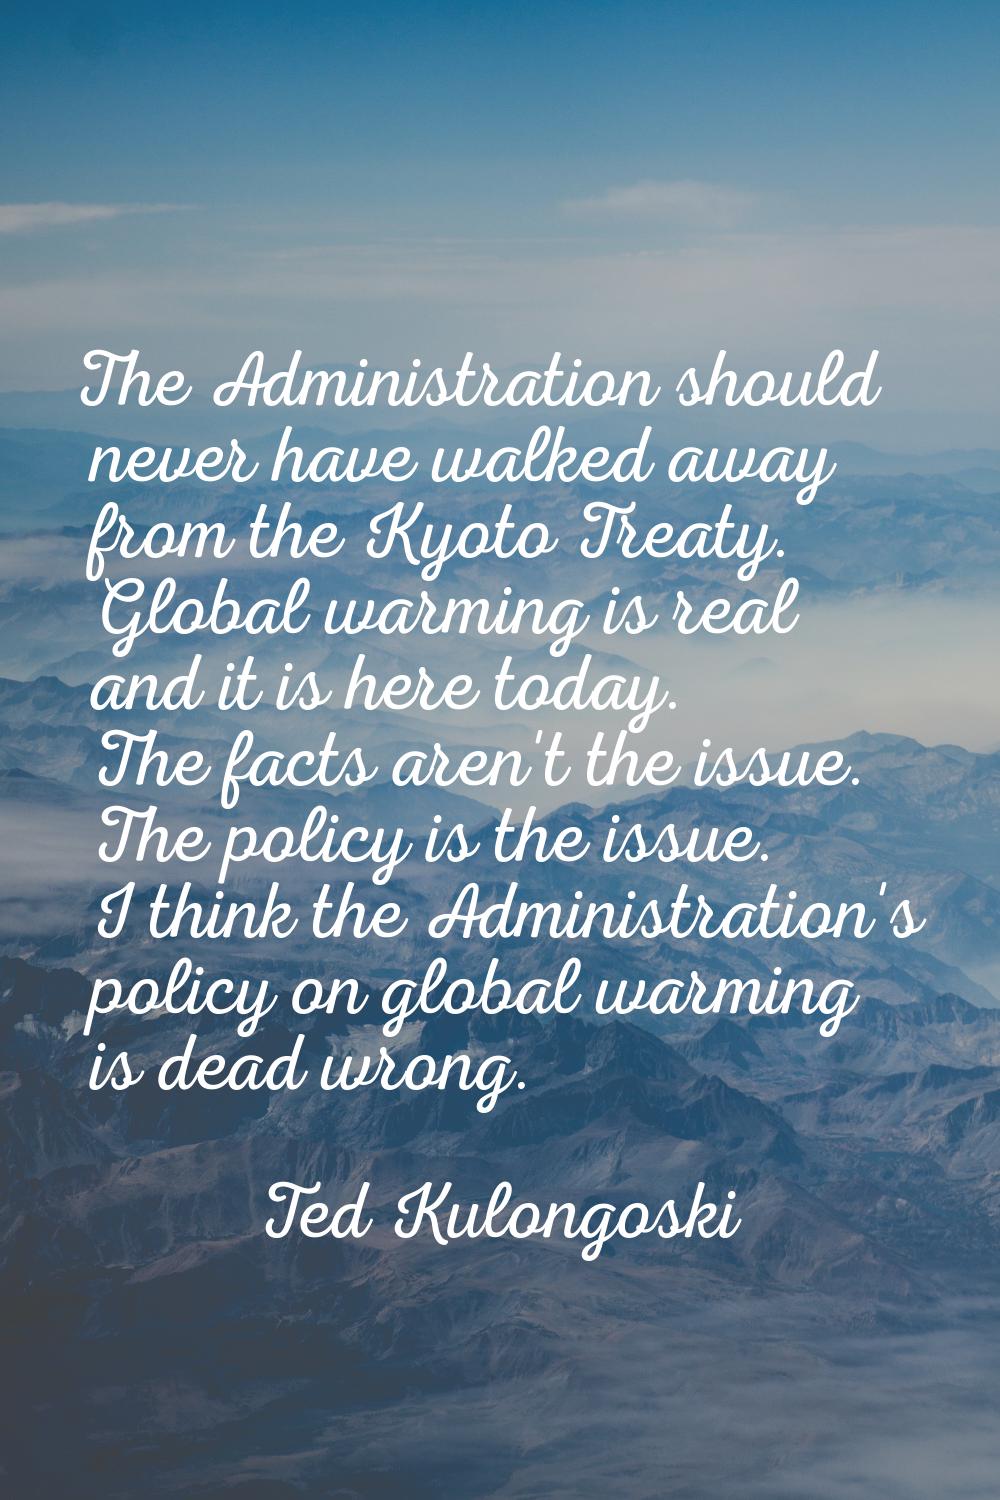 The Administration should never have walked away from the Kyoto Treaty. Global warming is real and 